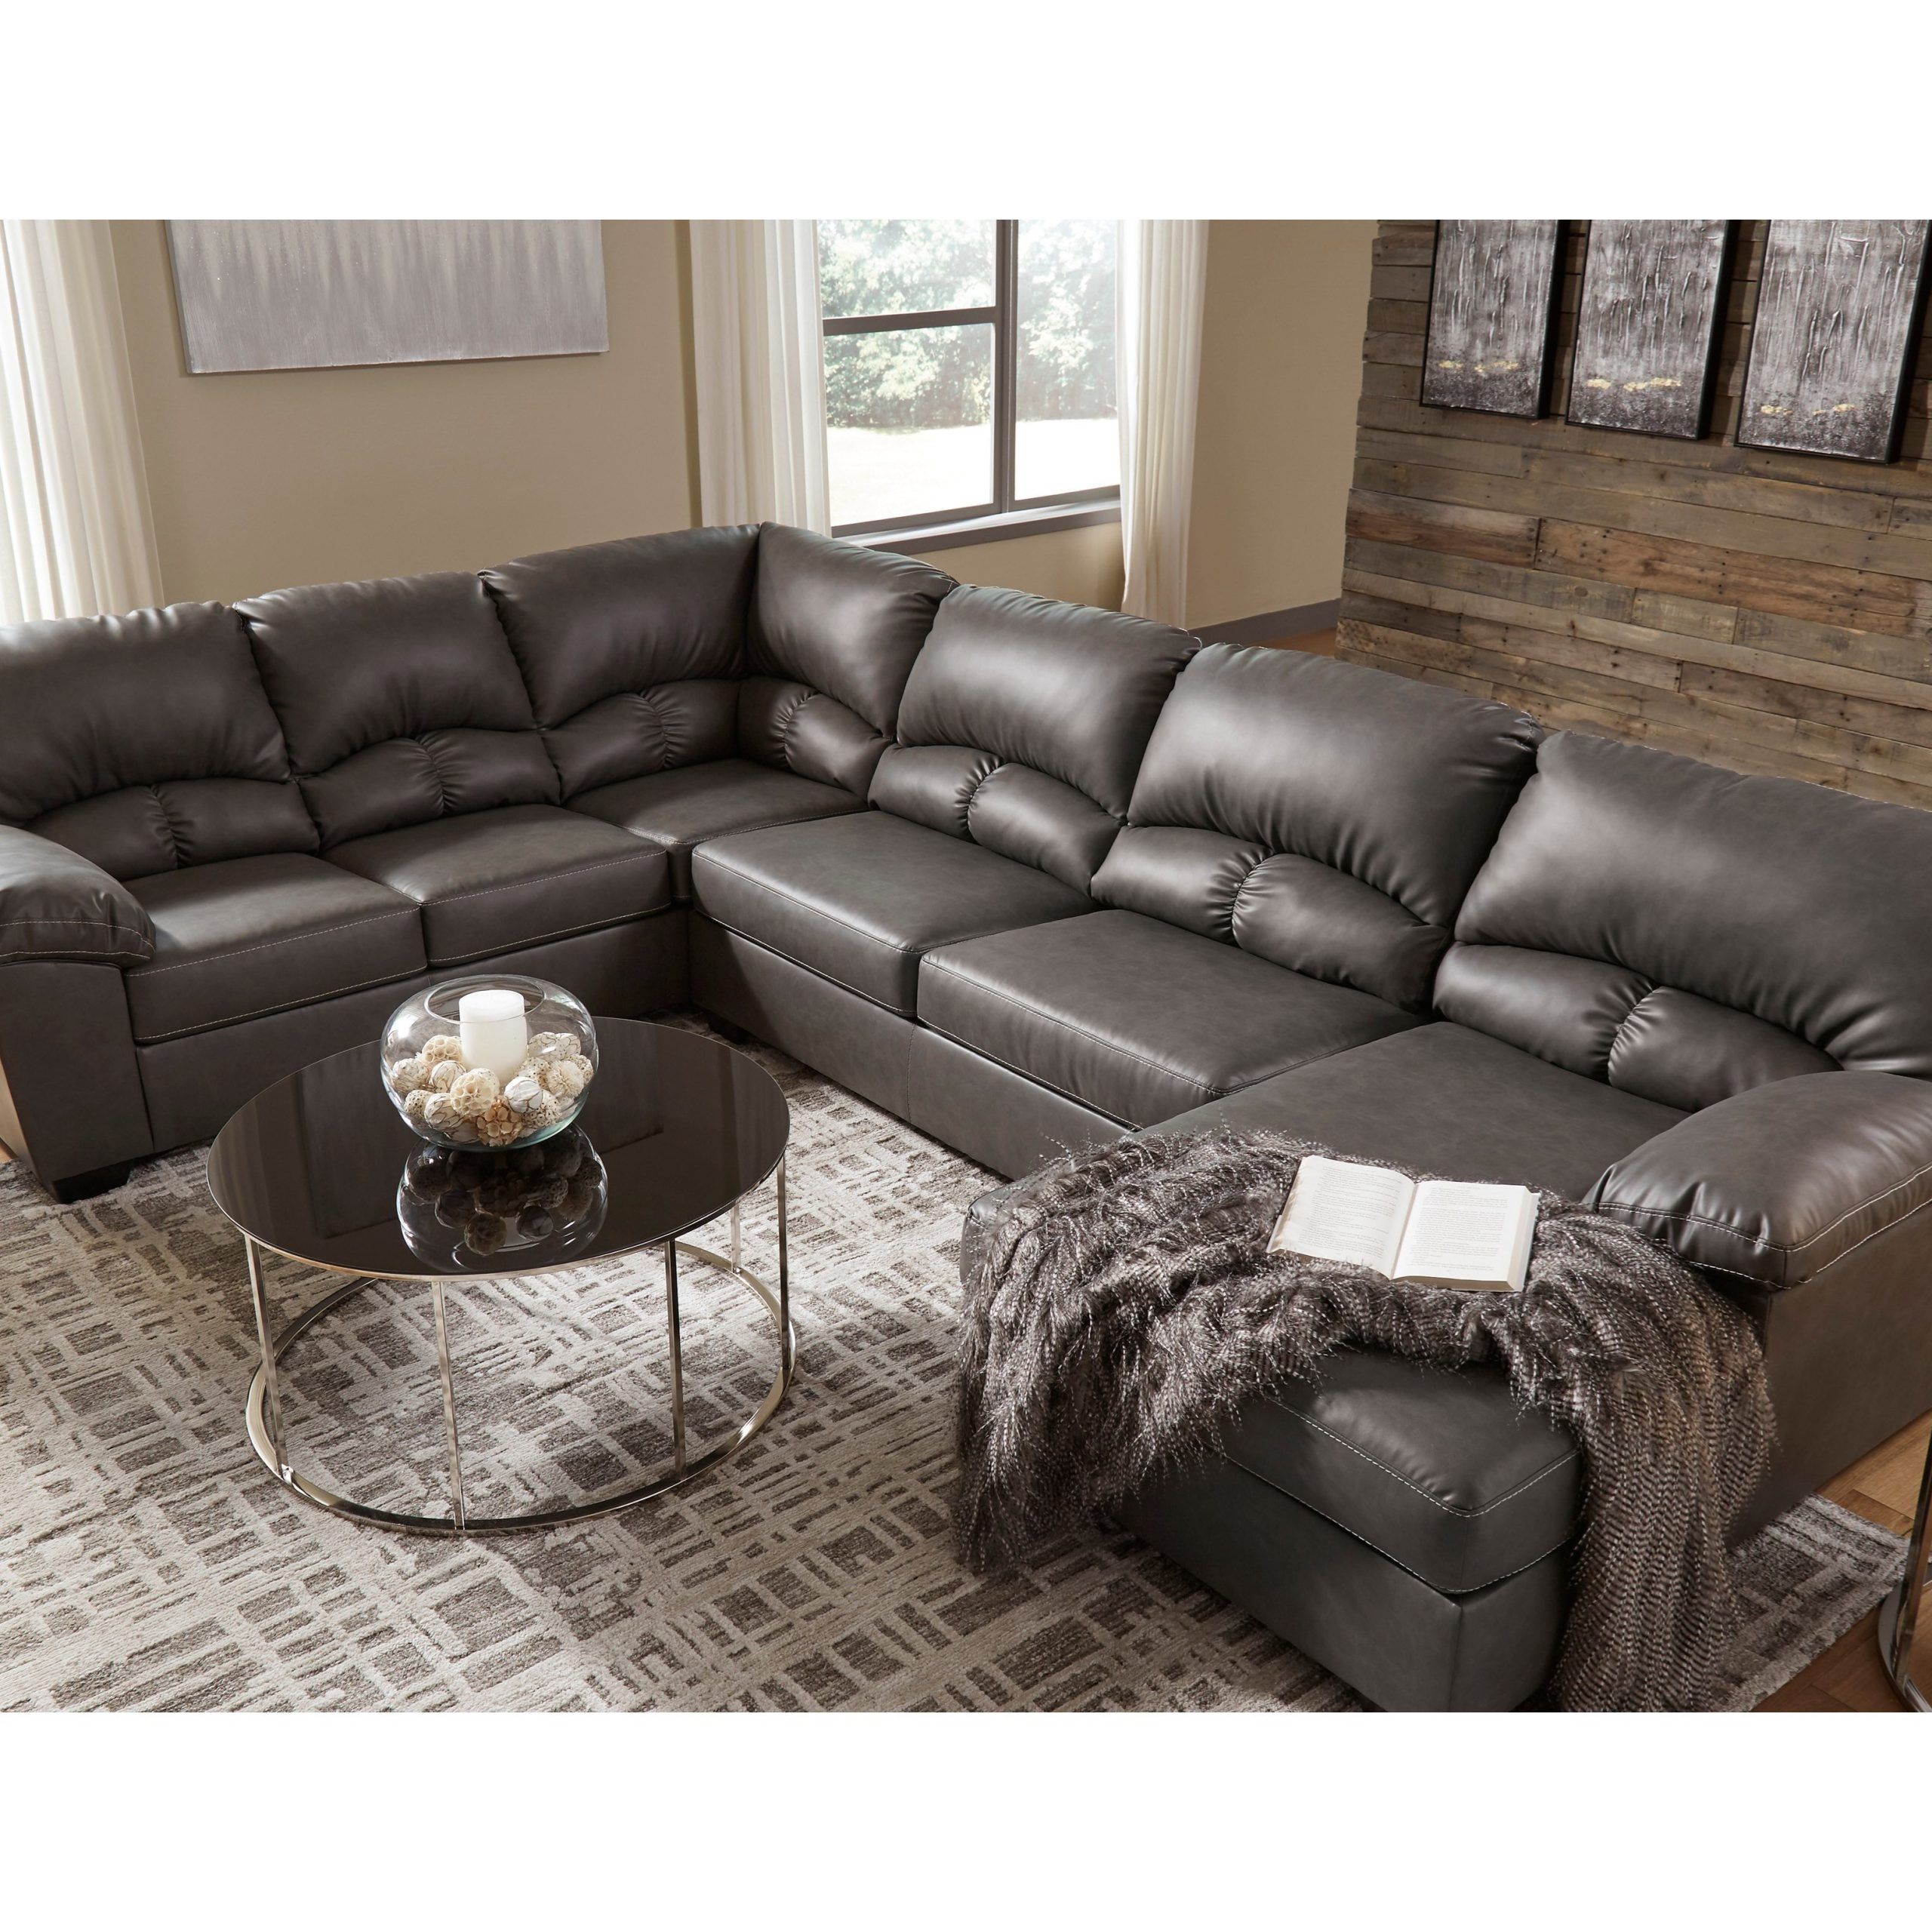 Benchcraft Aberton Faux Leather 3 Piece Sectional With Chaise | Wayside Within Faux Leather Sectional Sofa Sets (Gallery 2 of 21)